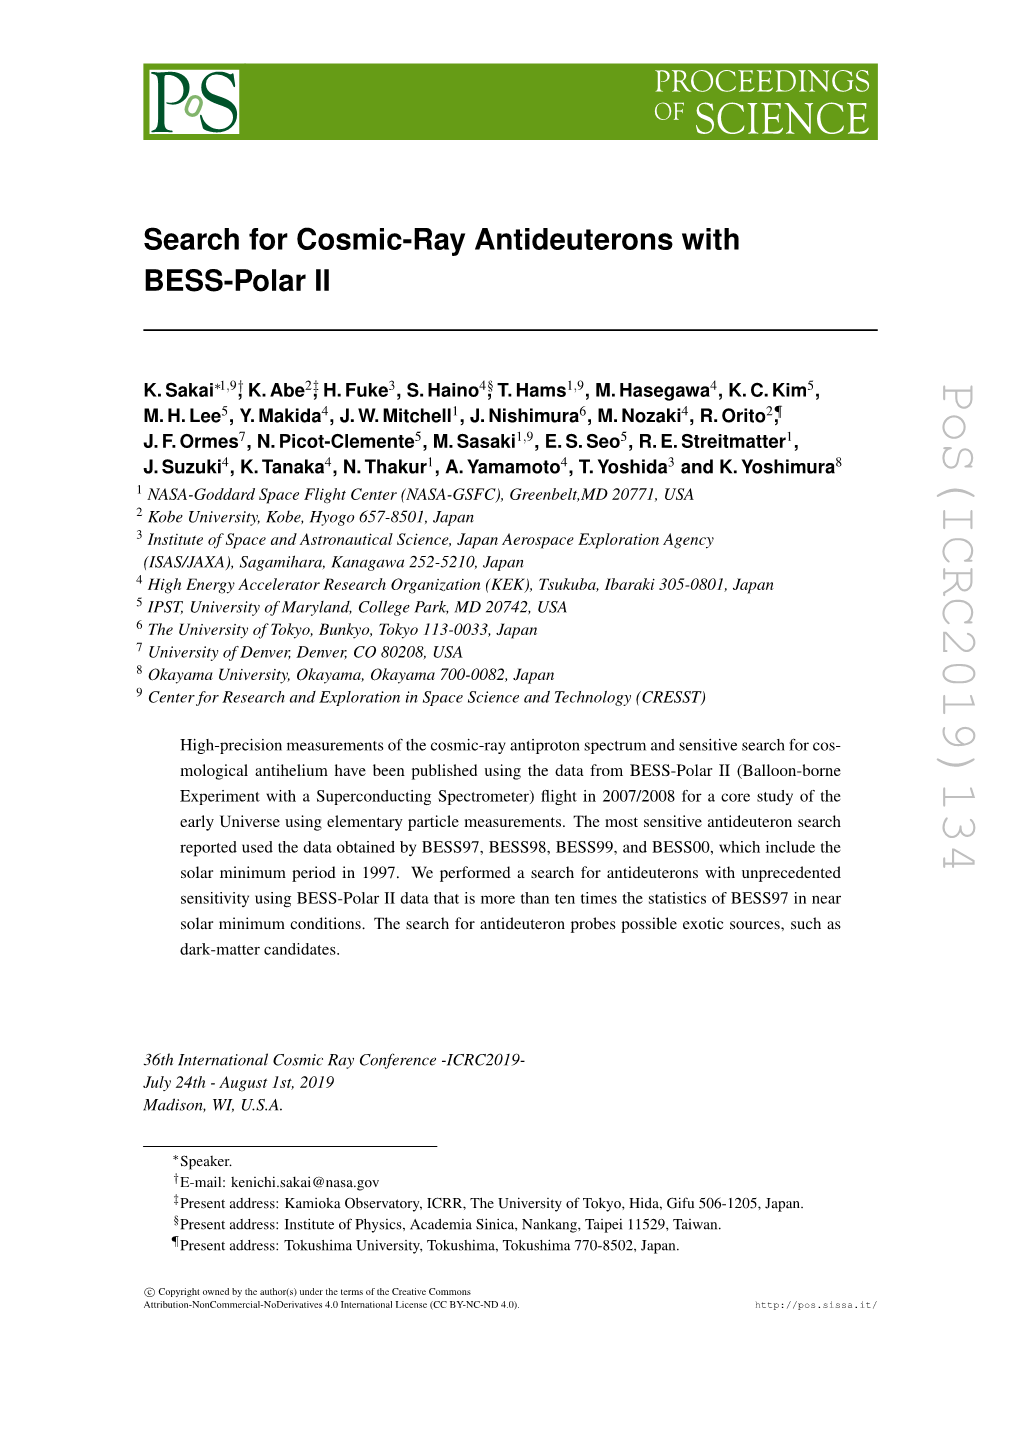 Search for Cosmic-Ray Antideuterons with BESS-Polar II M